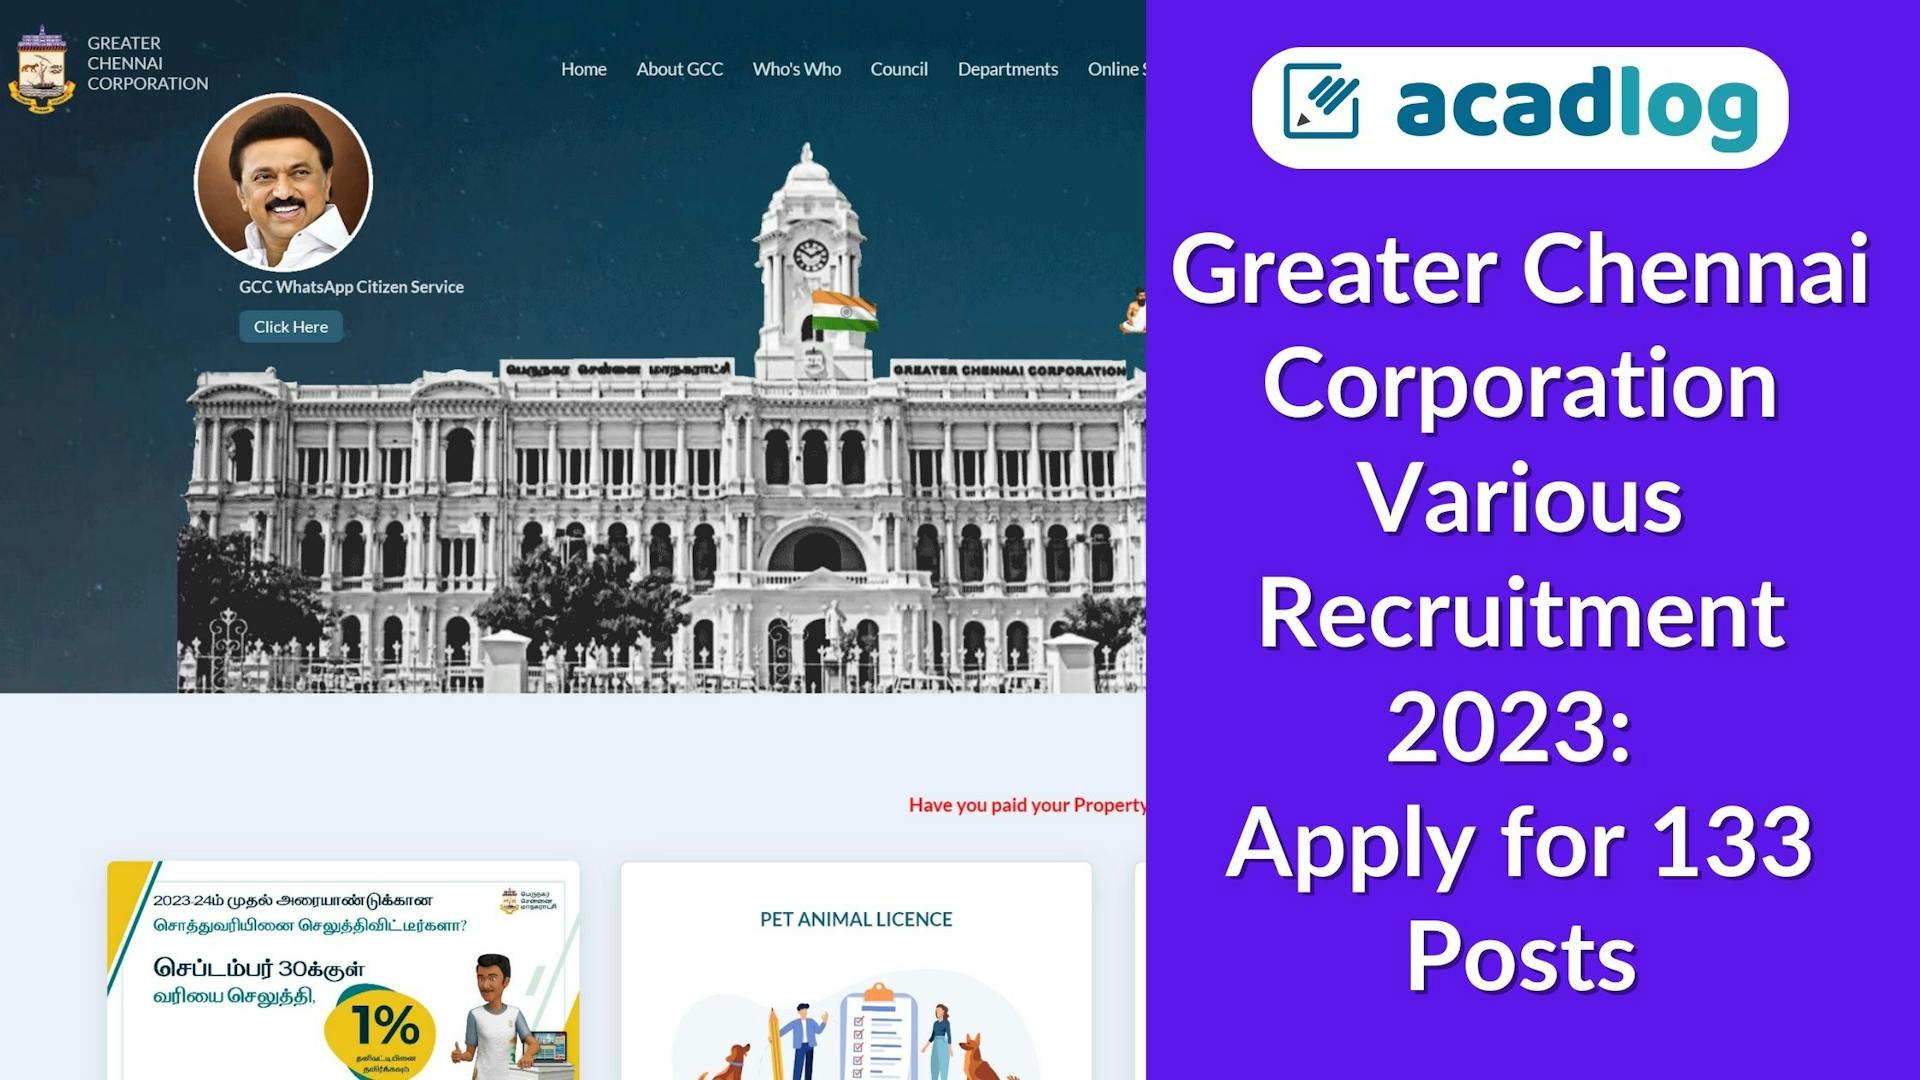 Greater Chennai Corporation Various Recruitment 2023: Apply for 133 Posts